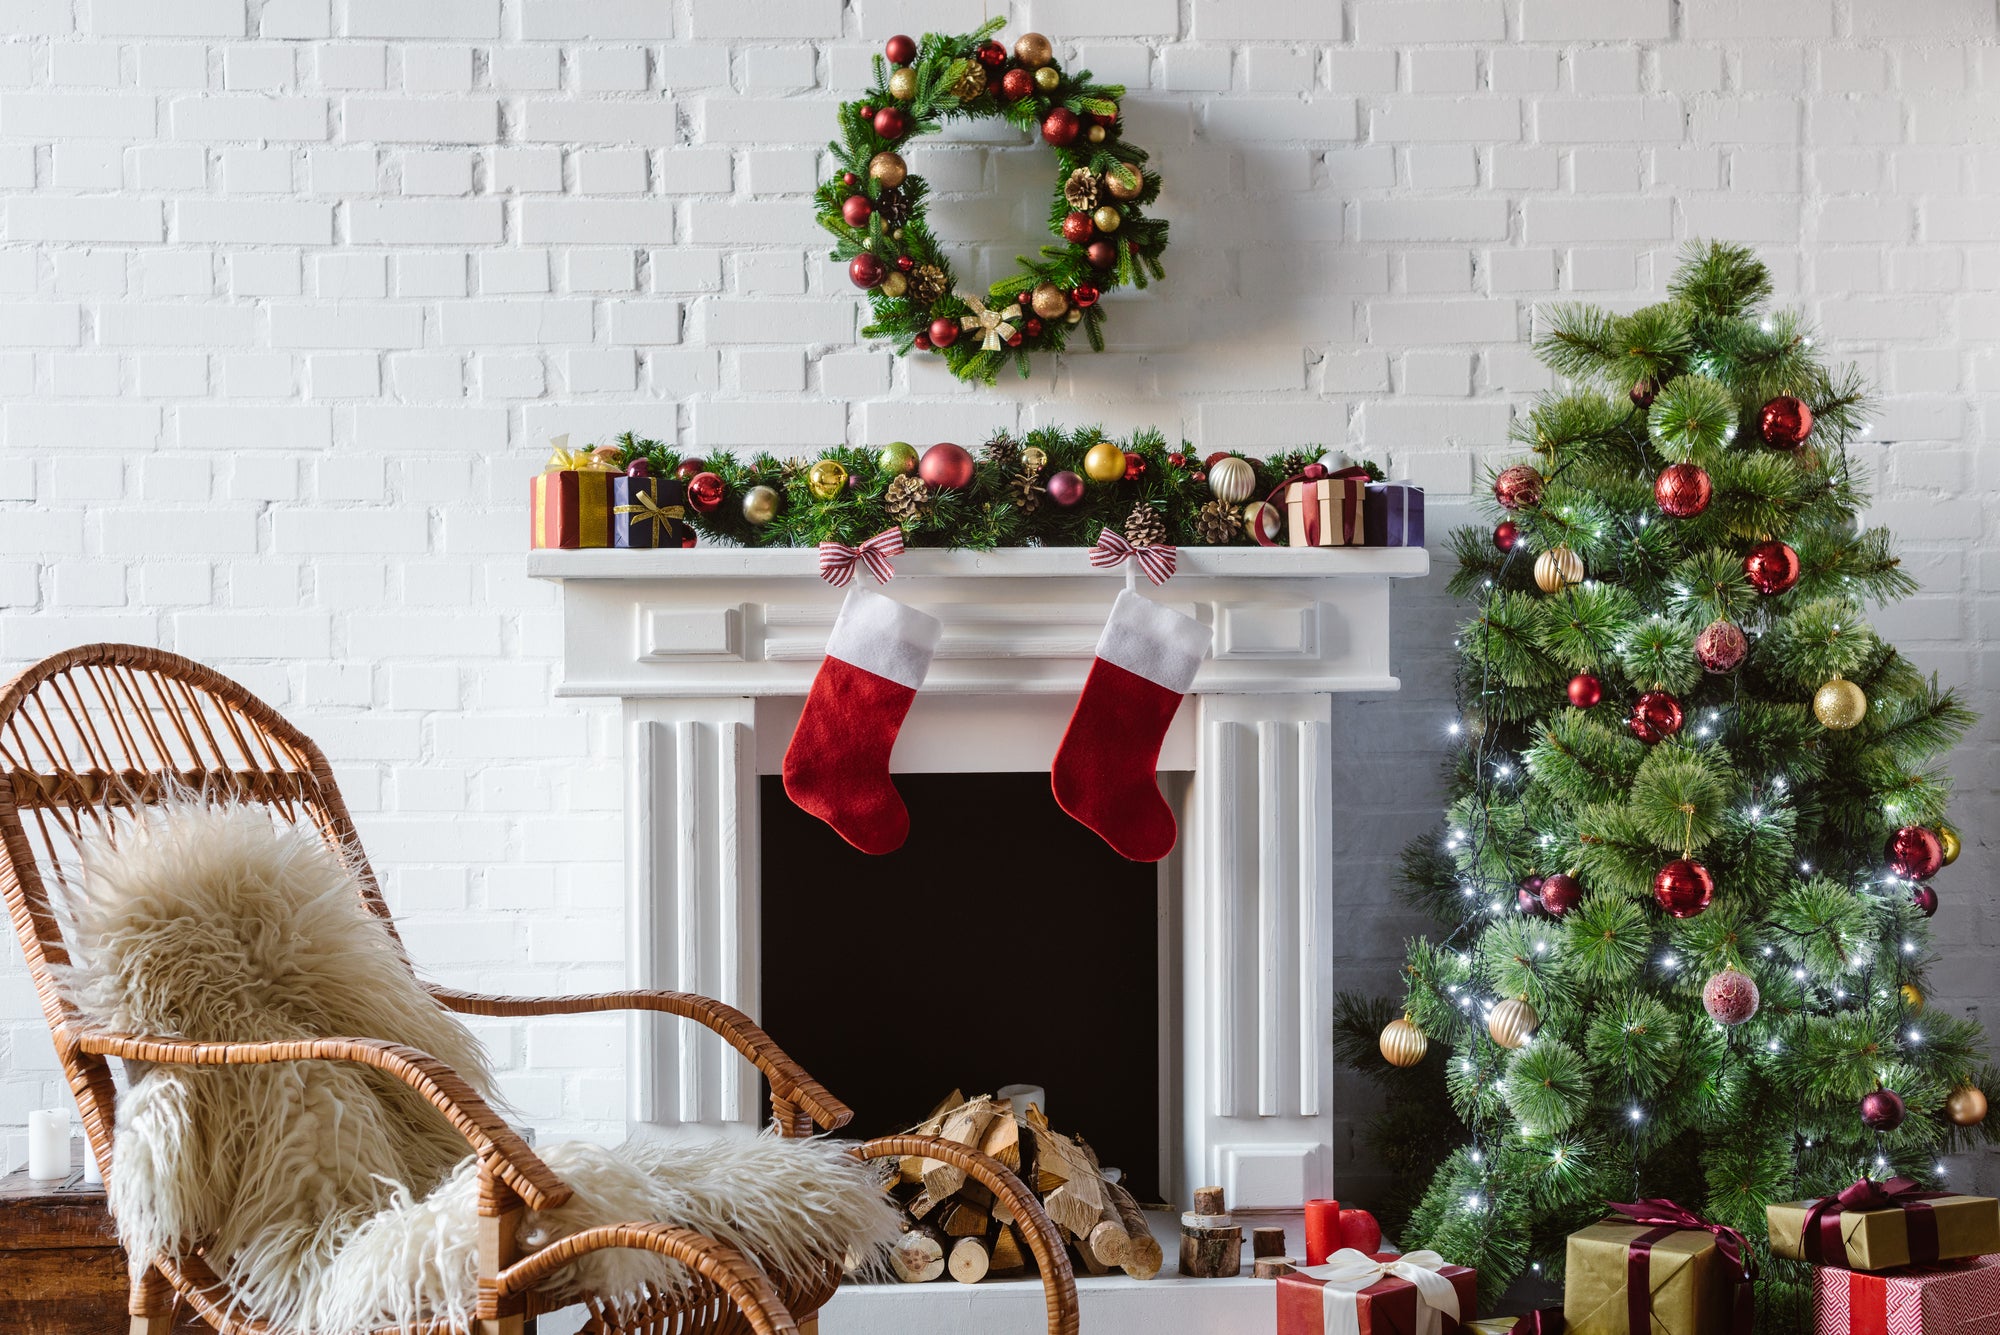 10 Easy Holiday Decor Ideas That Take 5 Minutes or Less